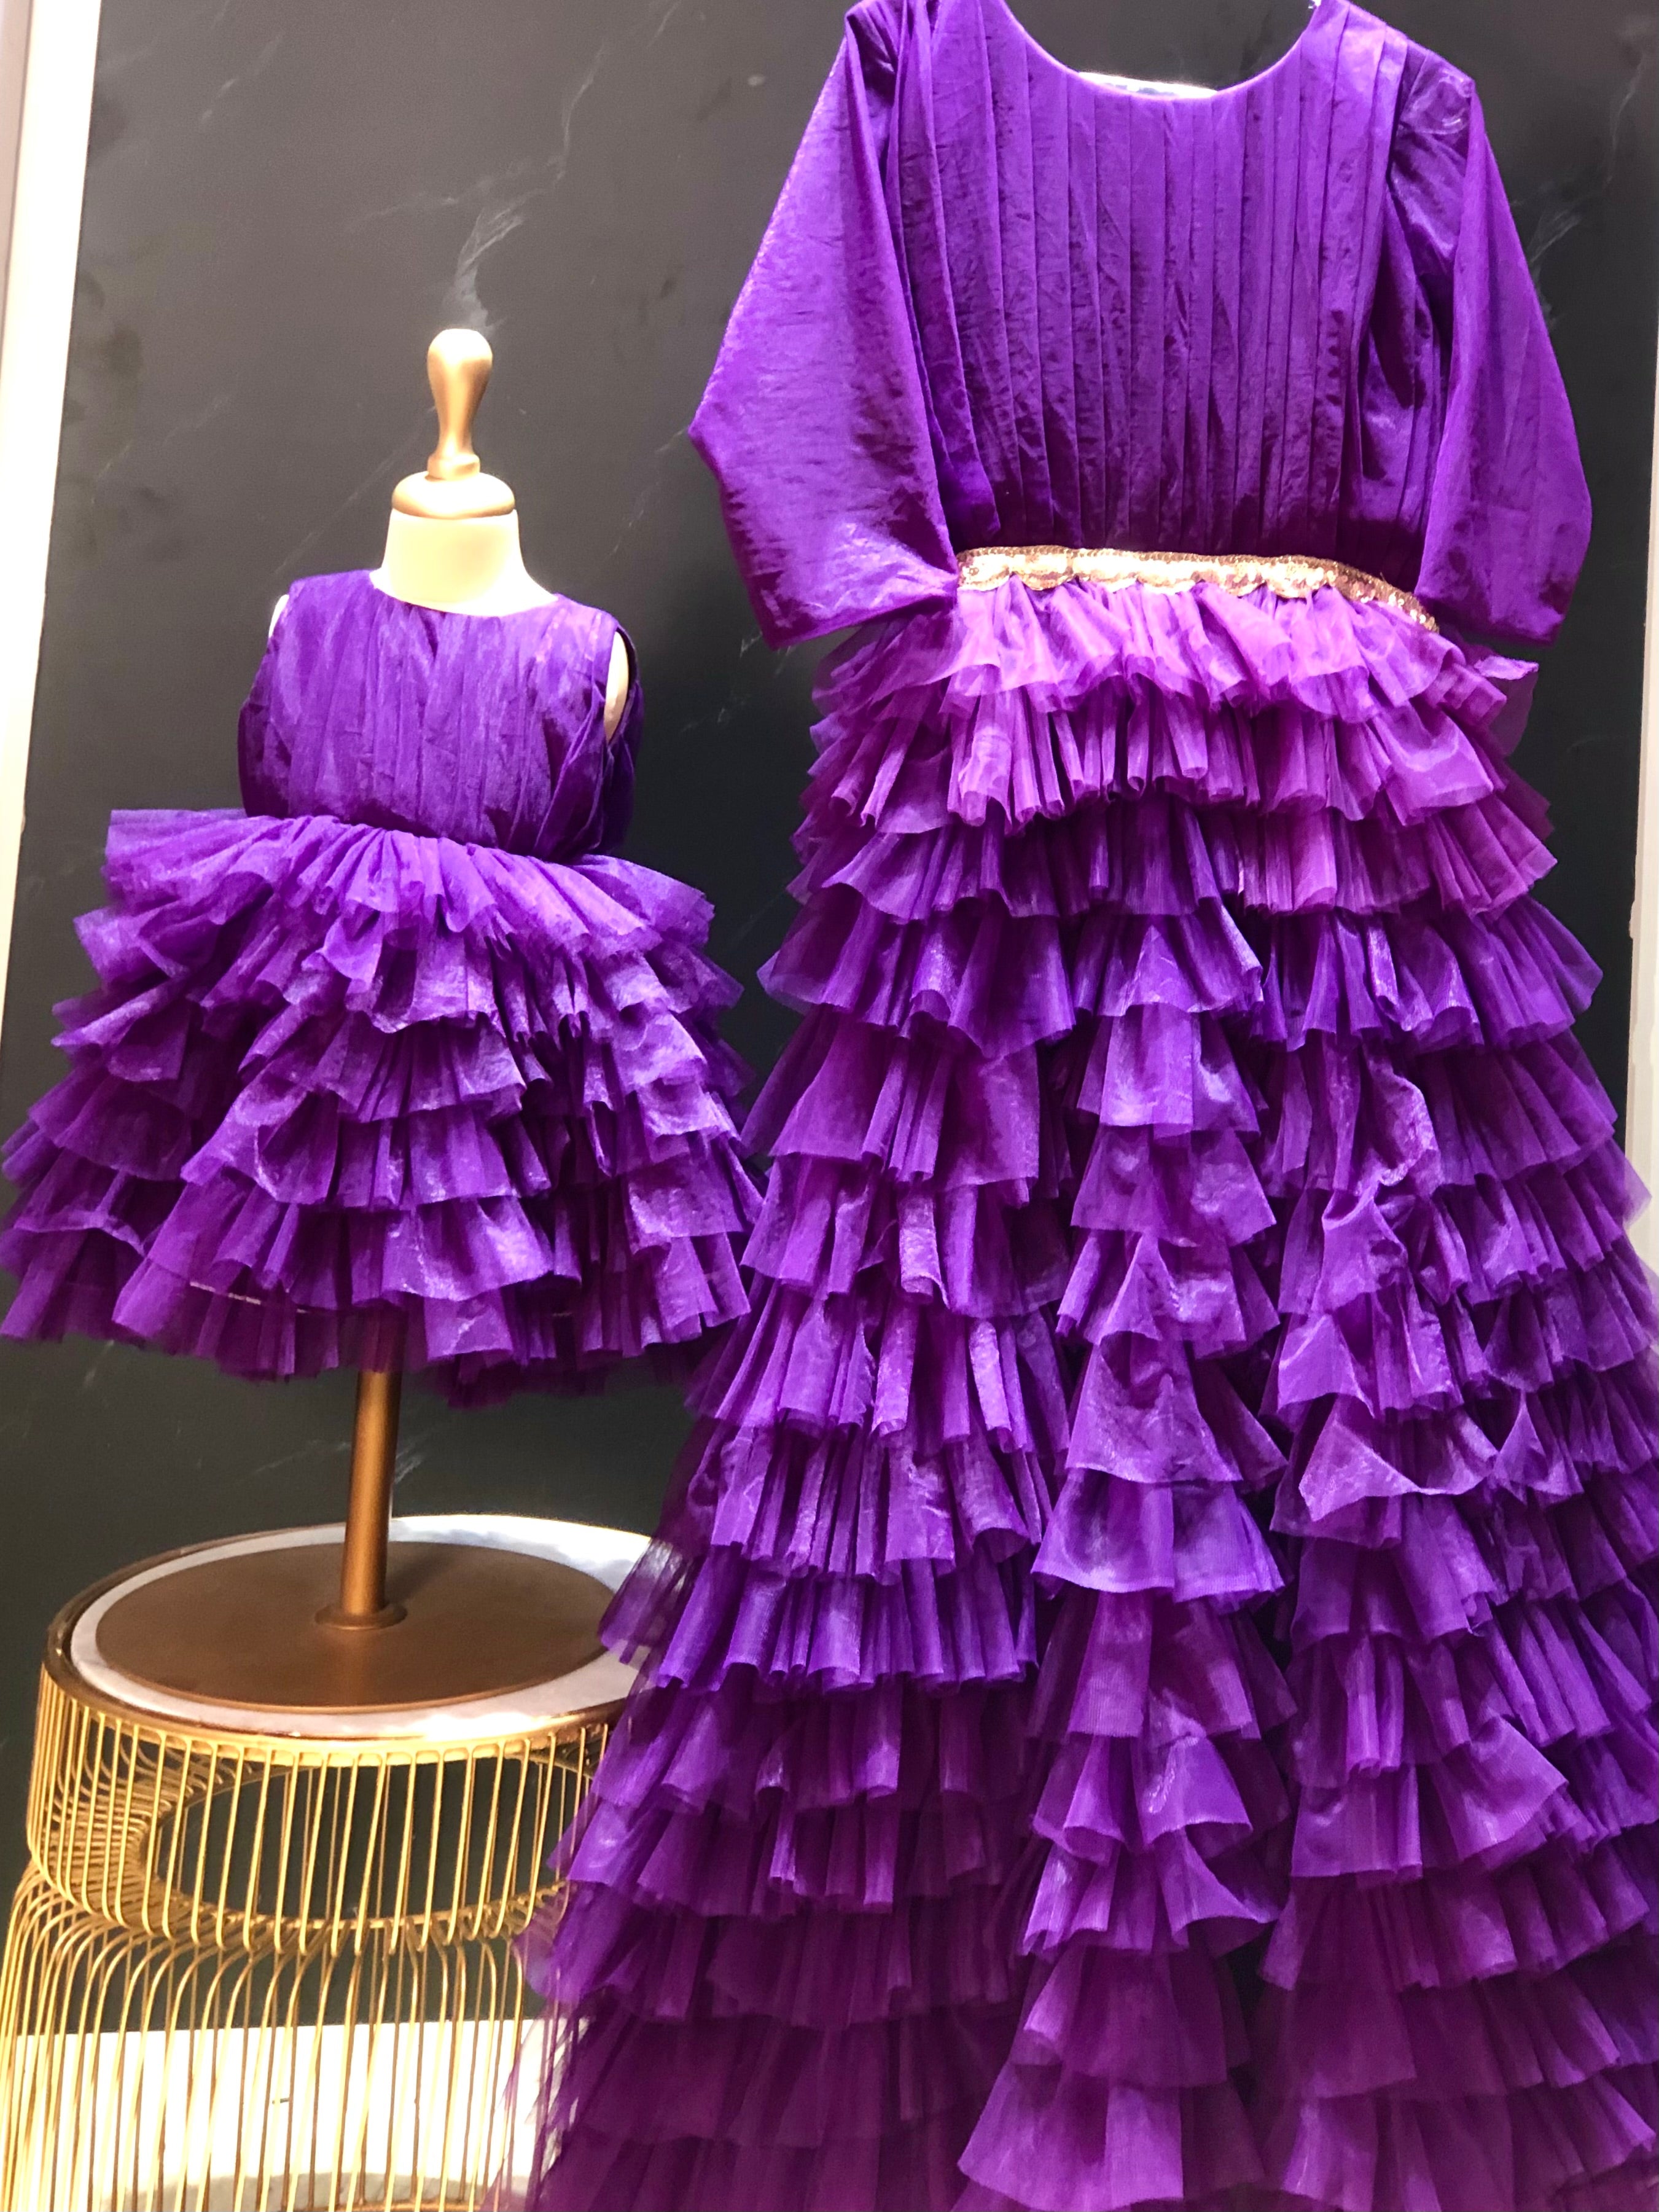 Dark Purple Sheath Purple Orchid Bridesmaid Dresses With Jewel Neckline And  Open Back Perfect For African Weddings And Guests From Lovemydress, $65.93  | DHgate.Com